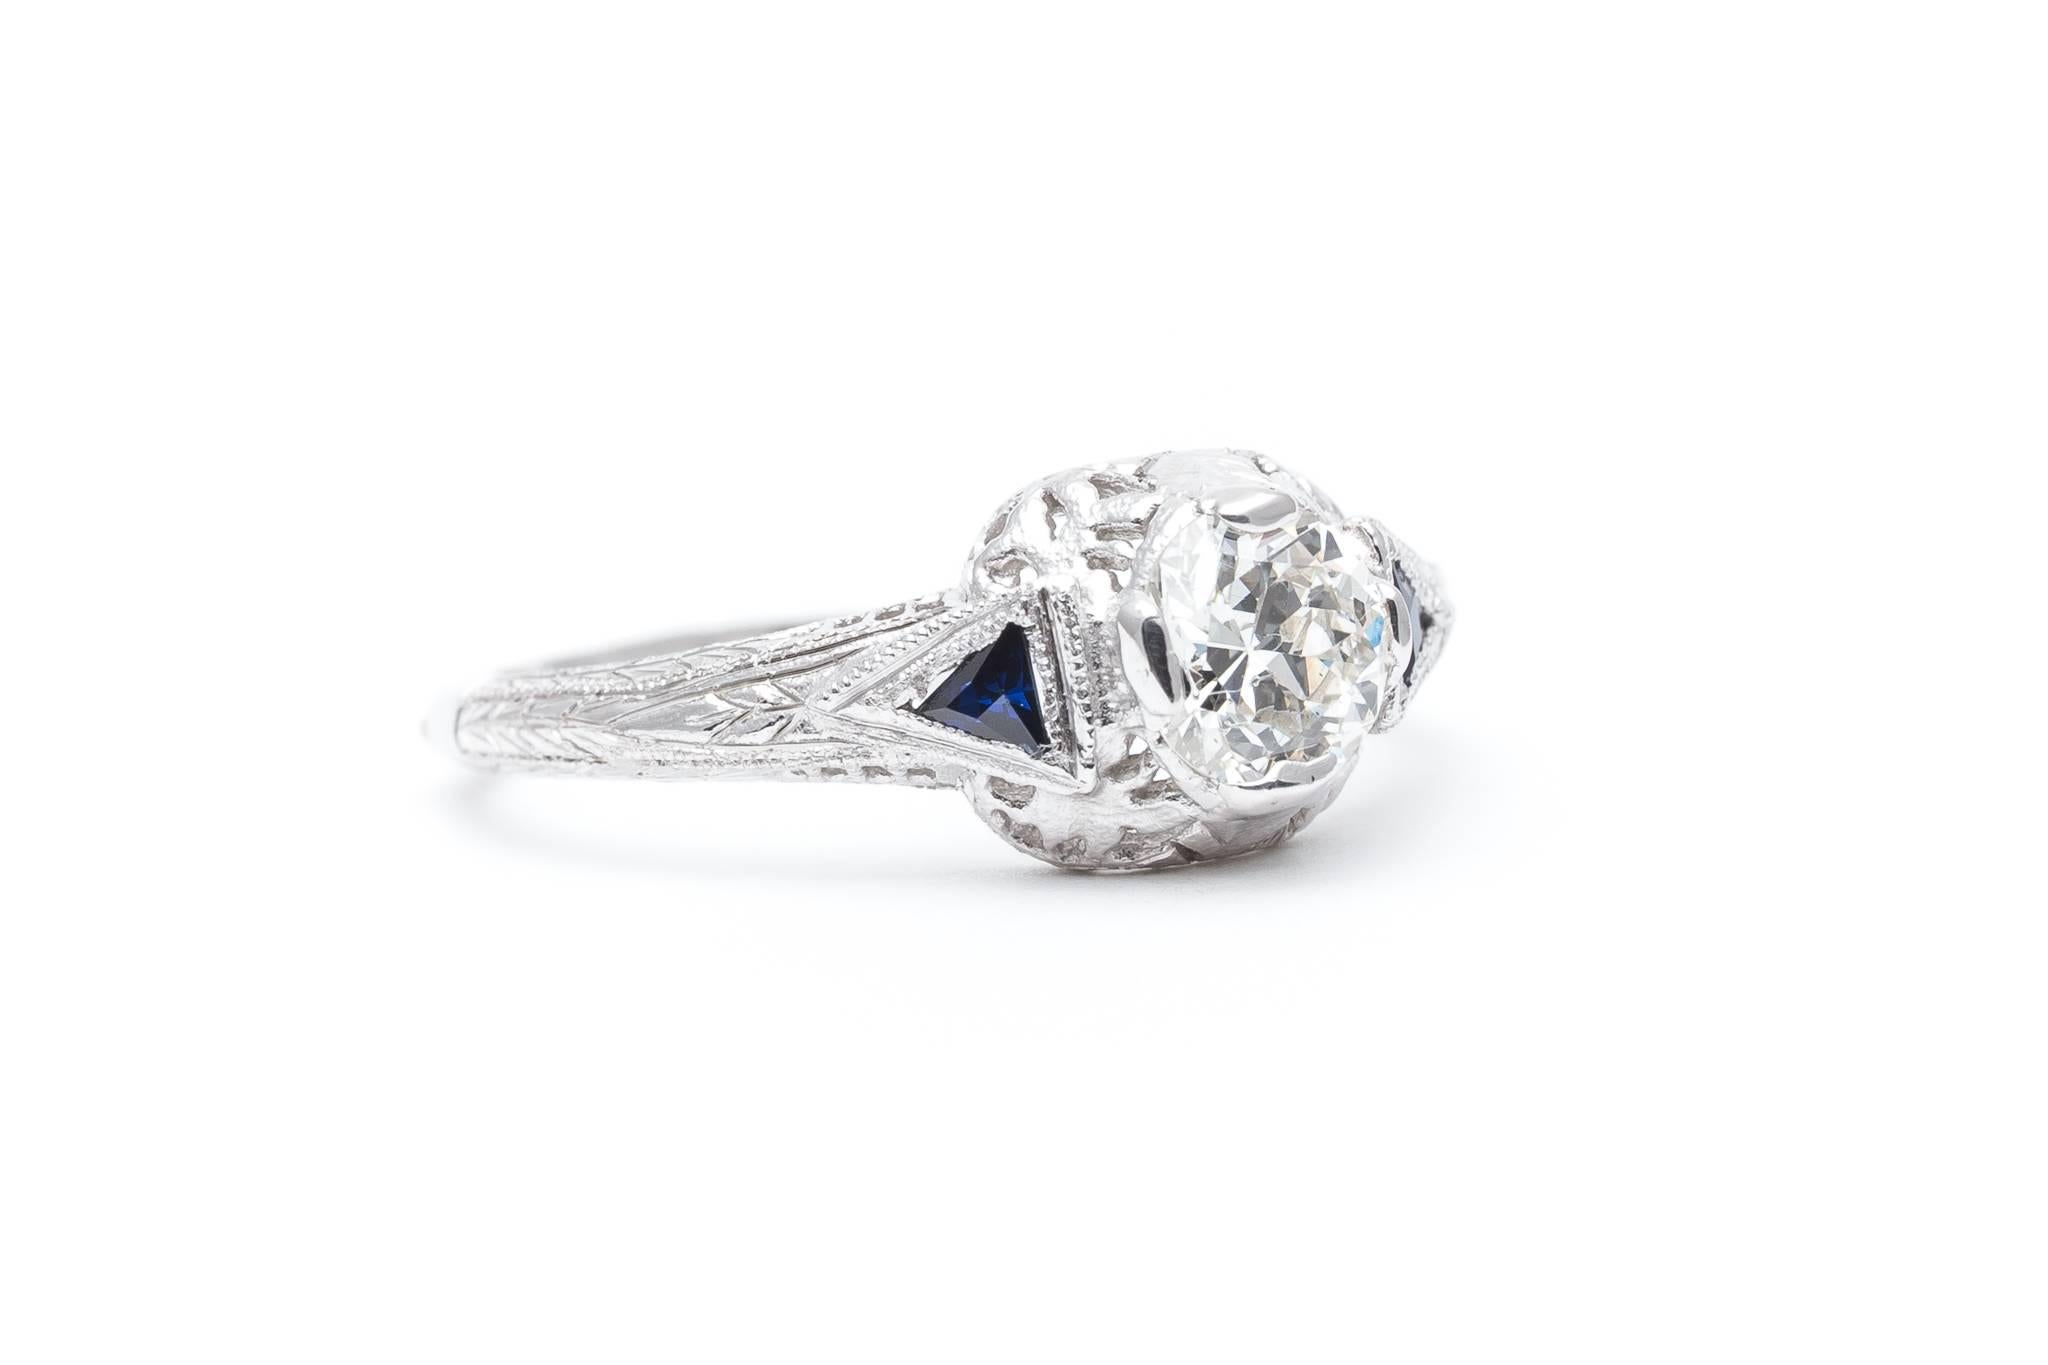 A beautiful hand engraved diamond and sapphire engagement ring. Centered by a sparkling 0.65 carat antique European cut diamond this ring features fantastic hand engraving and hand pierced filigree work throughout the mounting.

Secured by four